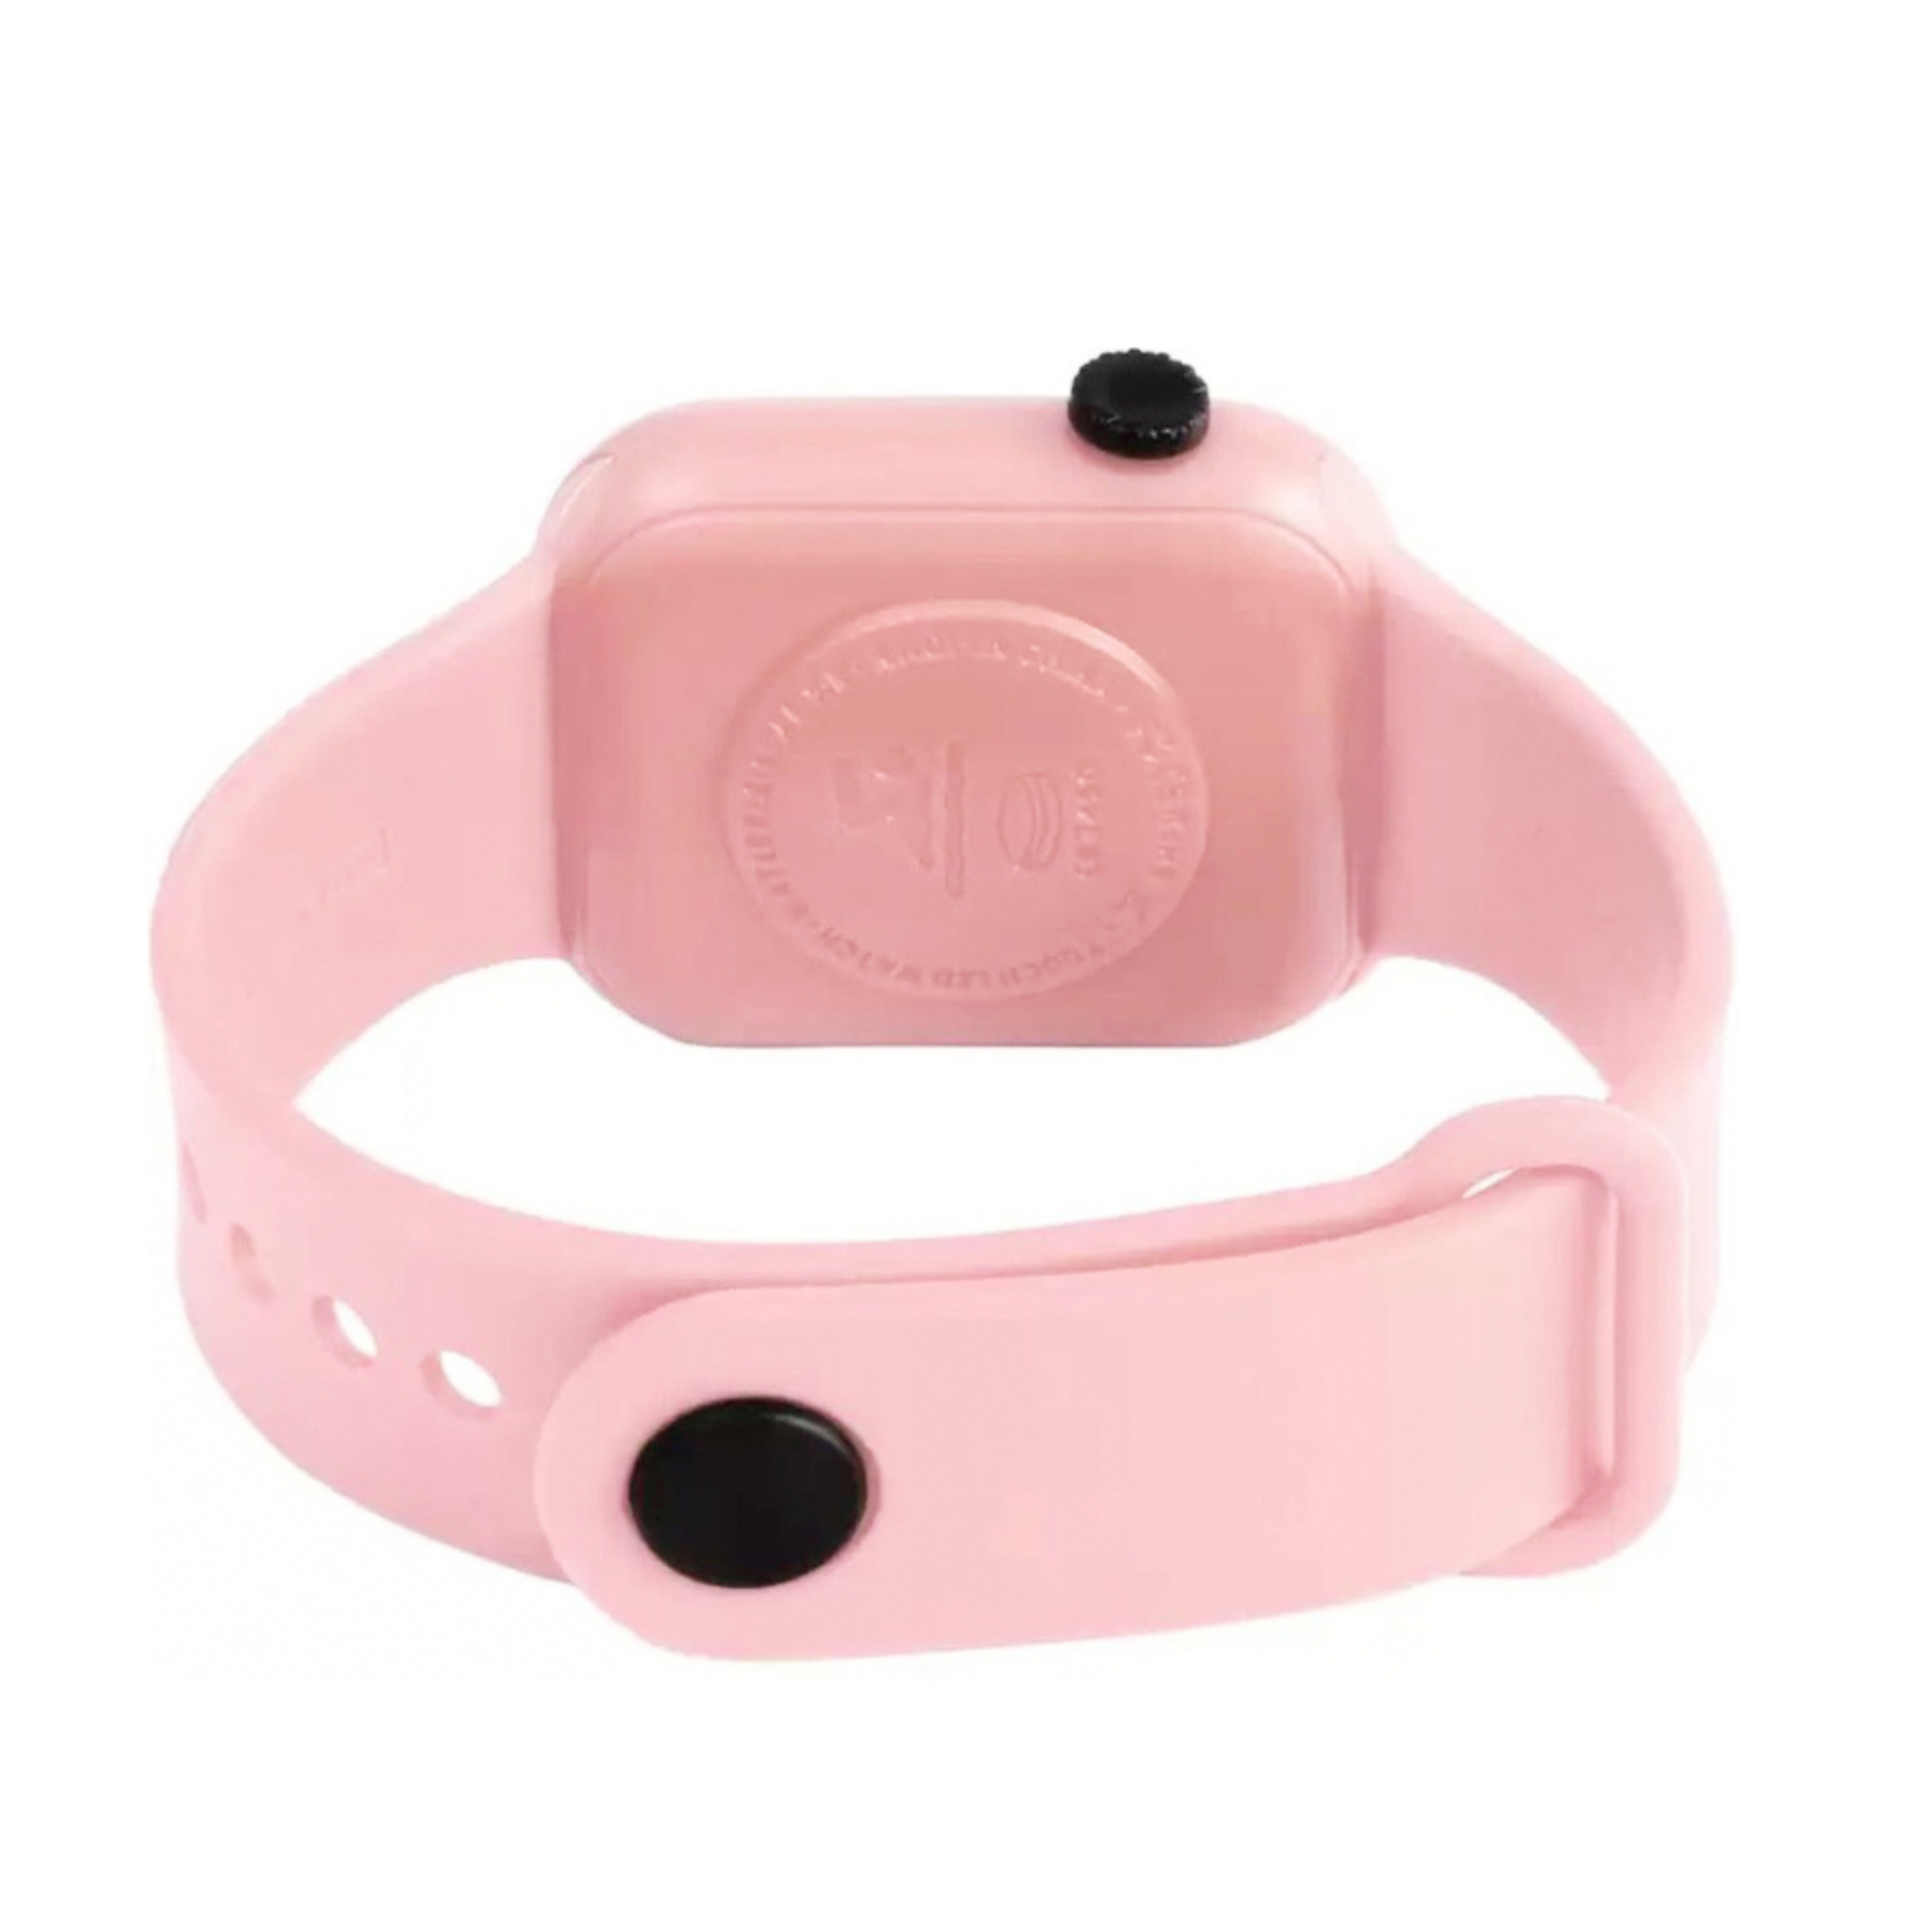 LOIS CARON  Teenagers LED Luxurious Fashion Silicone Pink Colored Digital Watch - For Boys & Girls D-1034 (Pink)